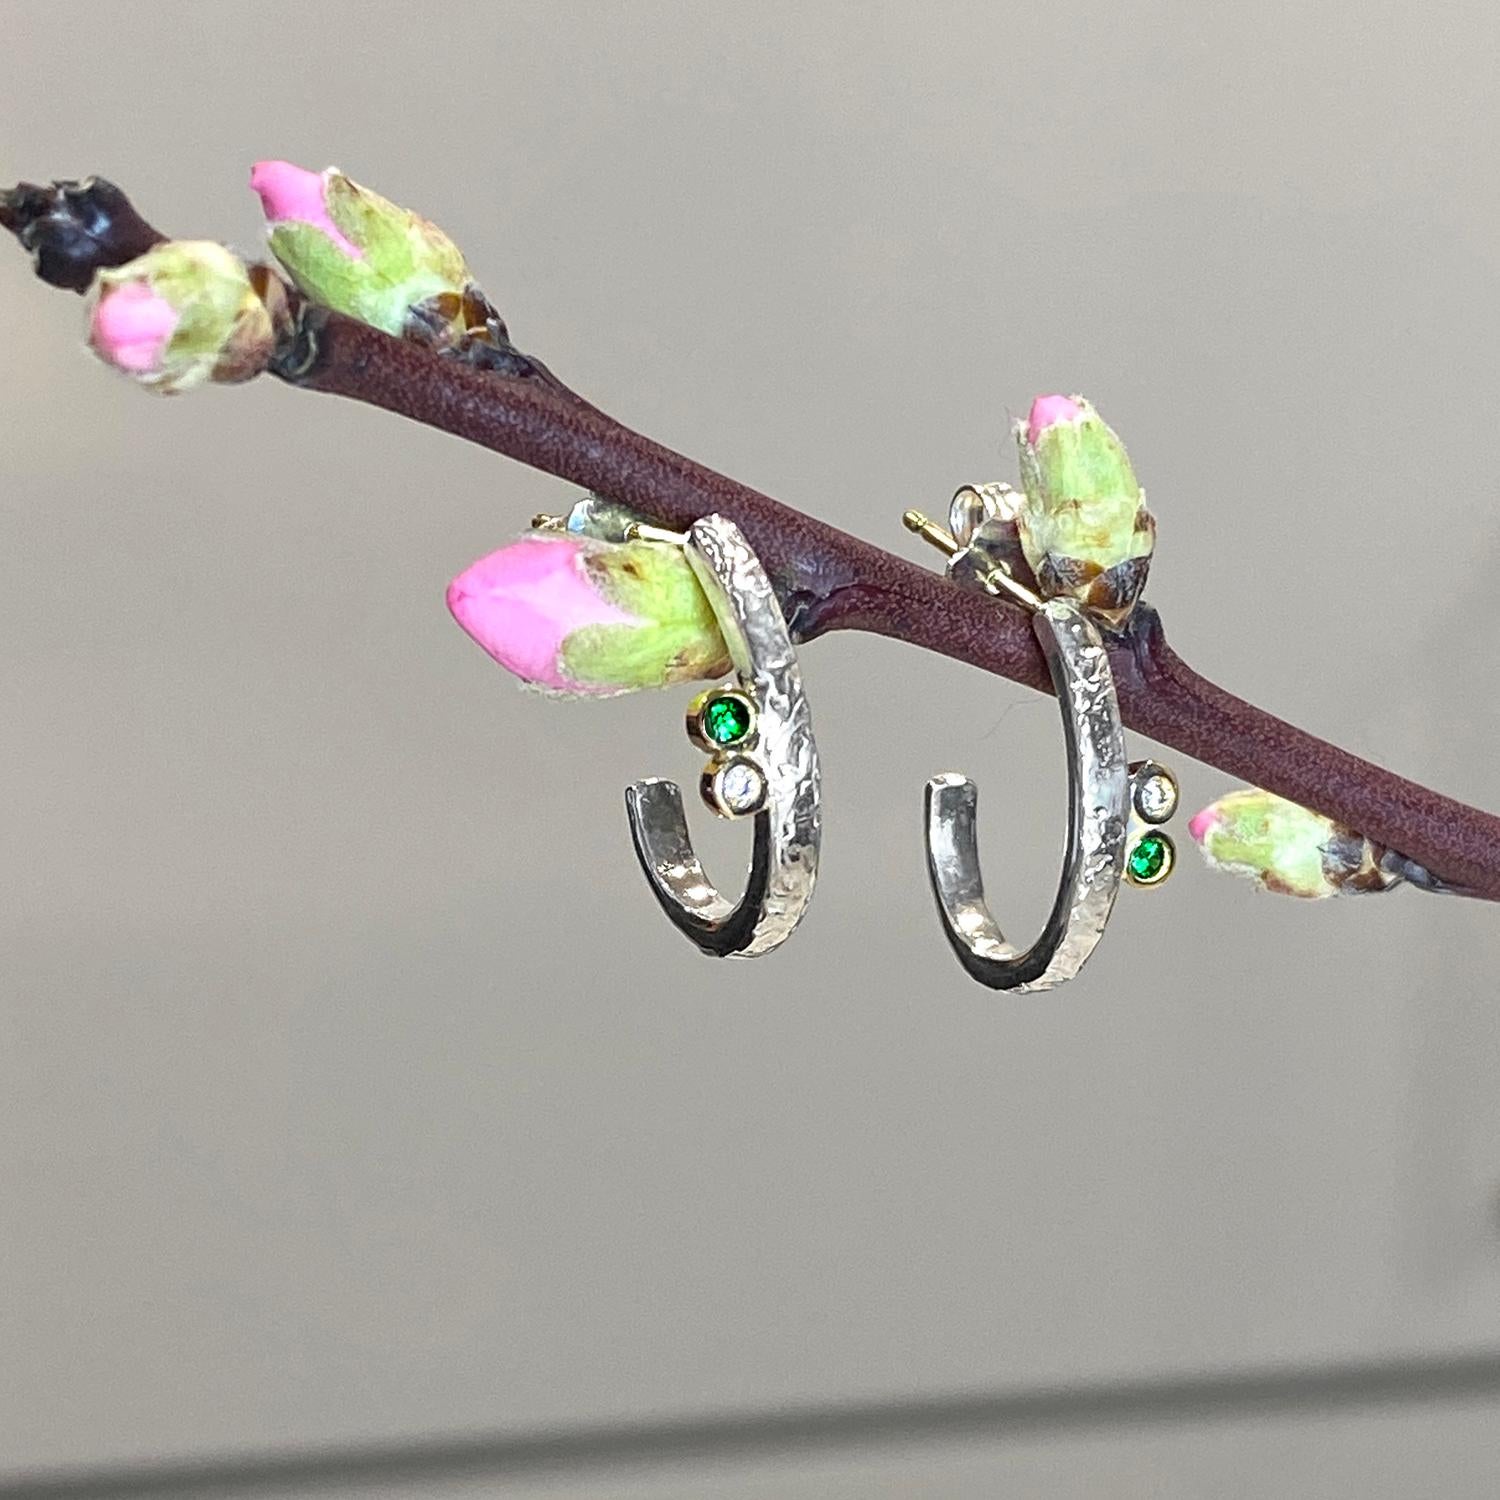 Keiko Mita's contemporary Lyla Hoops are handmade from Sterling Silver and accented with 0.02 Carats Diamonds (total weight) and 0.06 Carats Green Garnets (total weight). The textured hoops have 14 Karat Gold posts with Sterling Silver post catches.